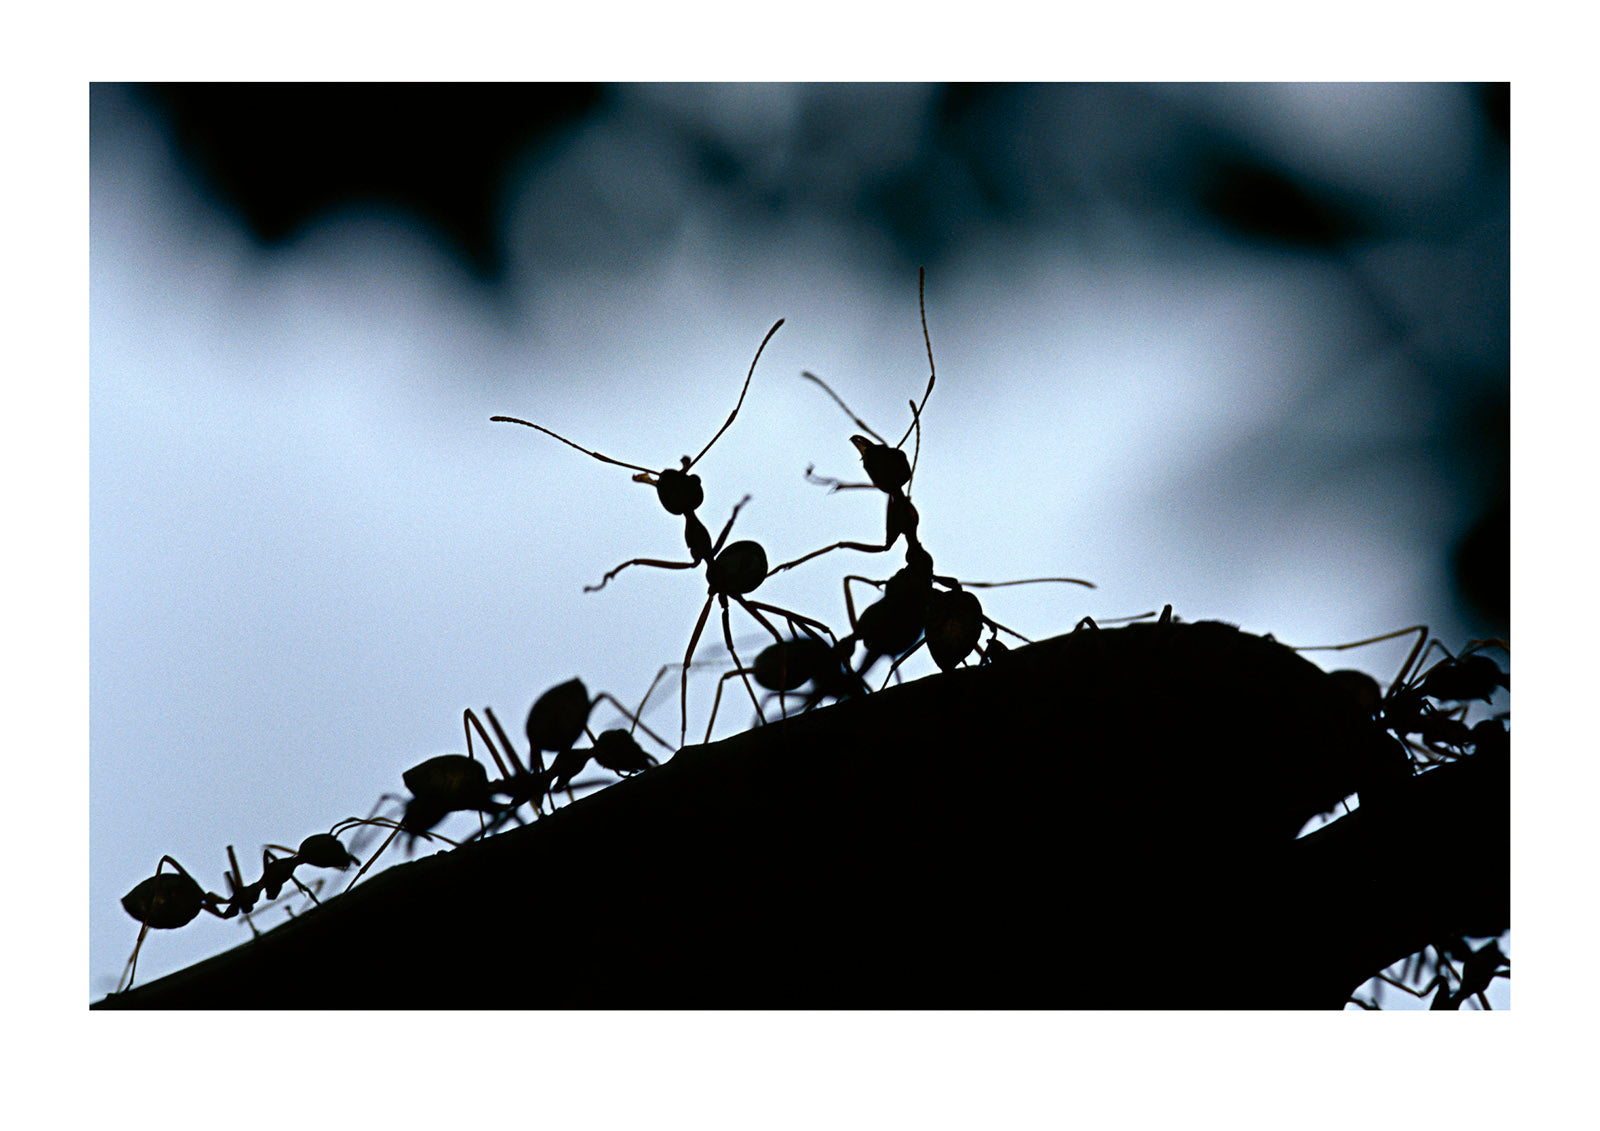 On a humid, grey afternoon a colony of Green Tree Ants are building their colony nest. Silhouetted against a leaden sky they worked tirelessly in unison. The smaller workers known as ‘minors’ stitching together leaves using the silk produced by their larvae. Simultaneously, the larger workers known as ‘majors’ adopted a soldier ant role guarding the perimeter. Queensland, Australia.